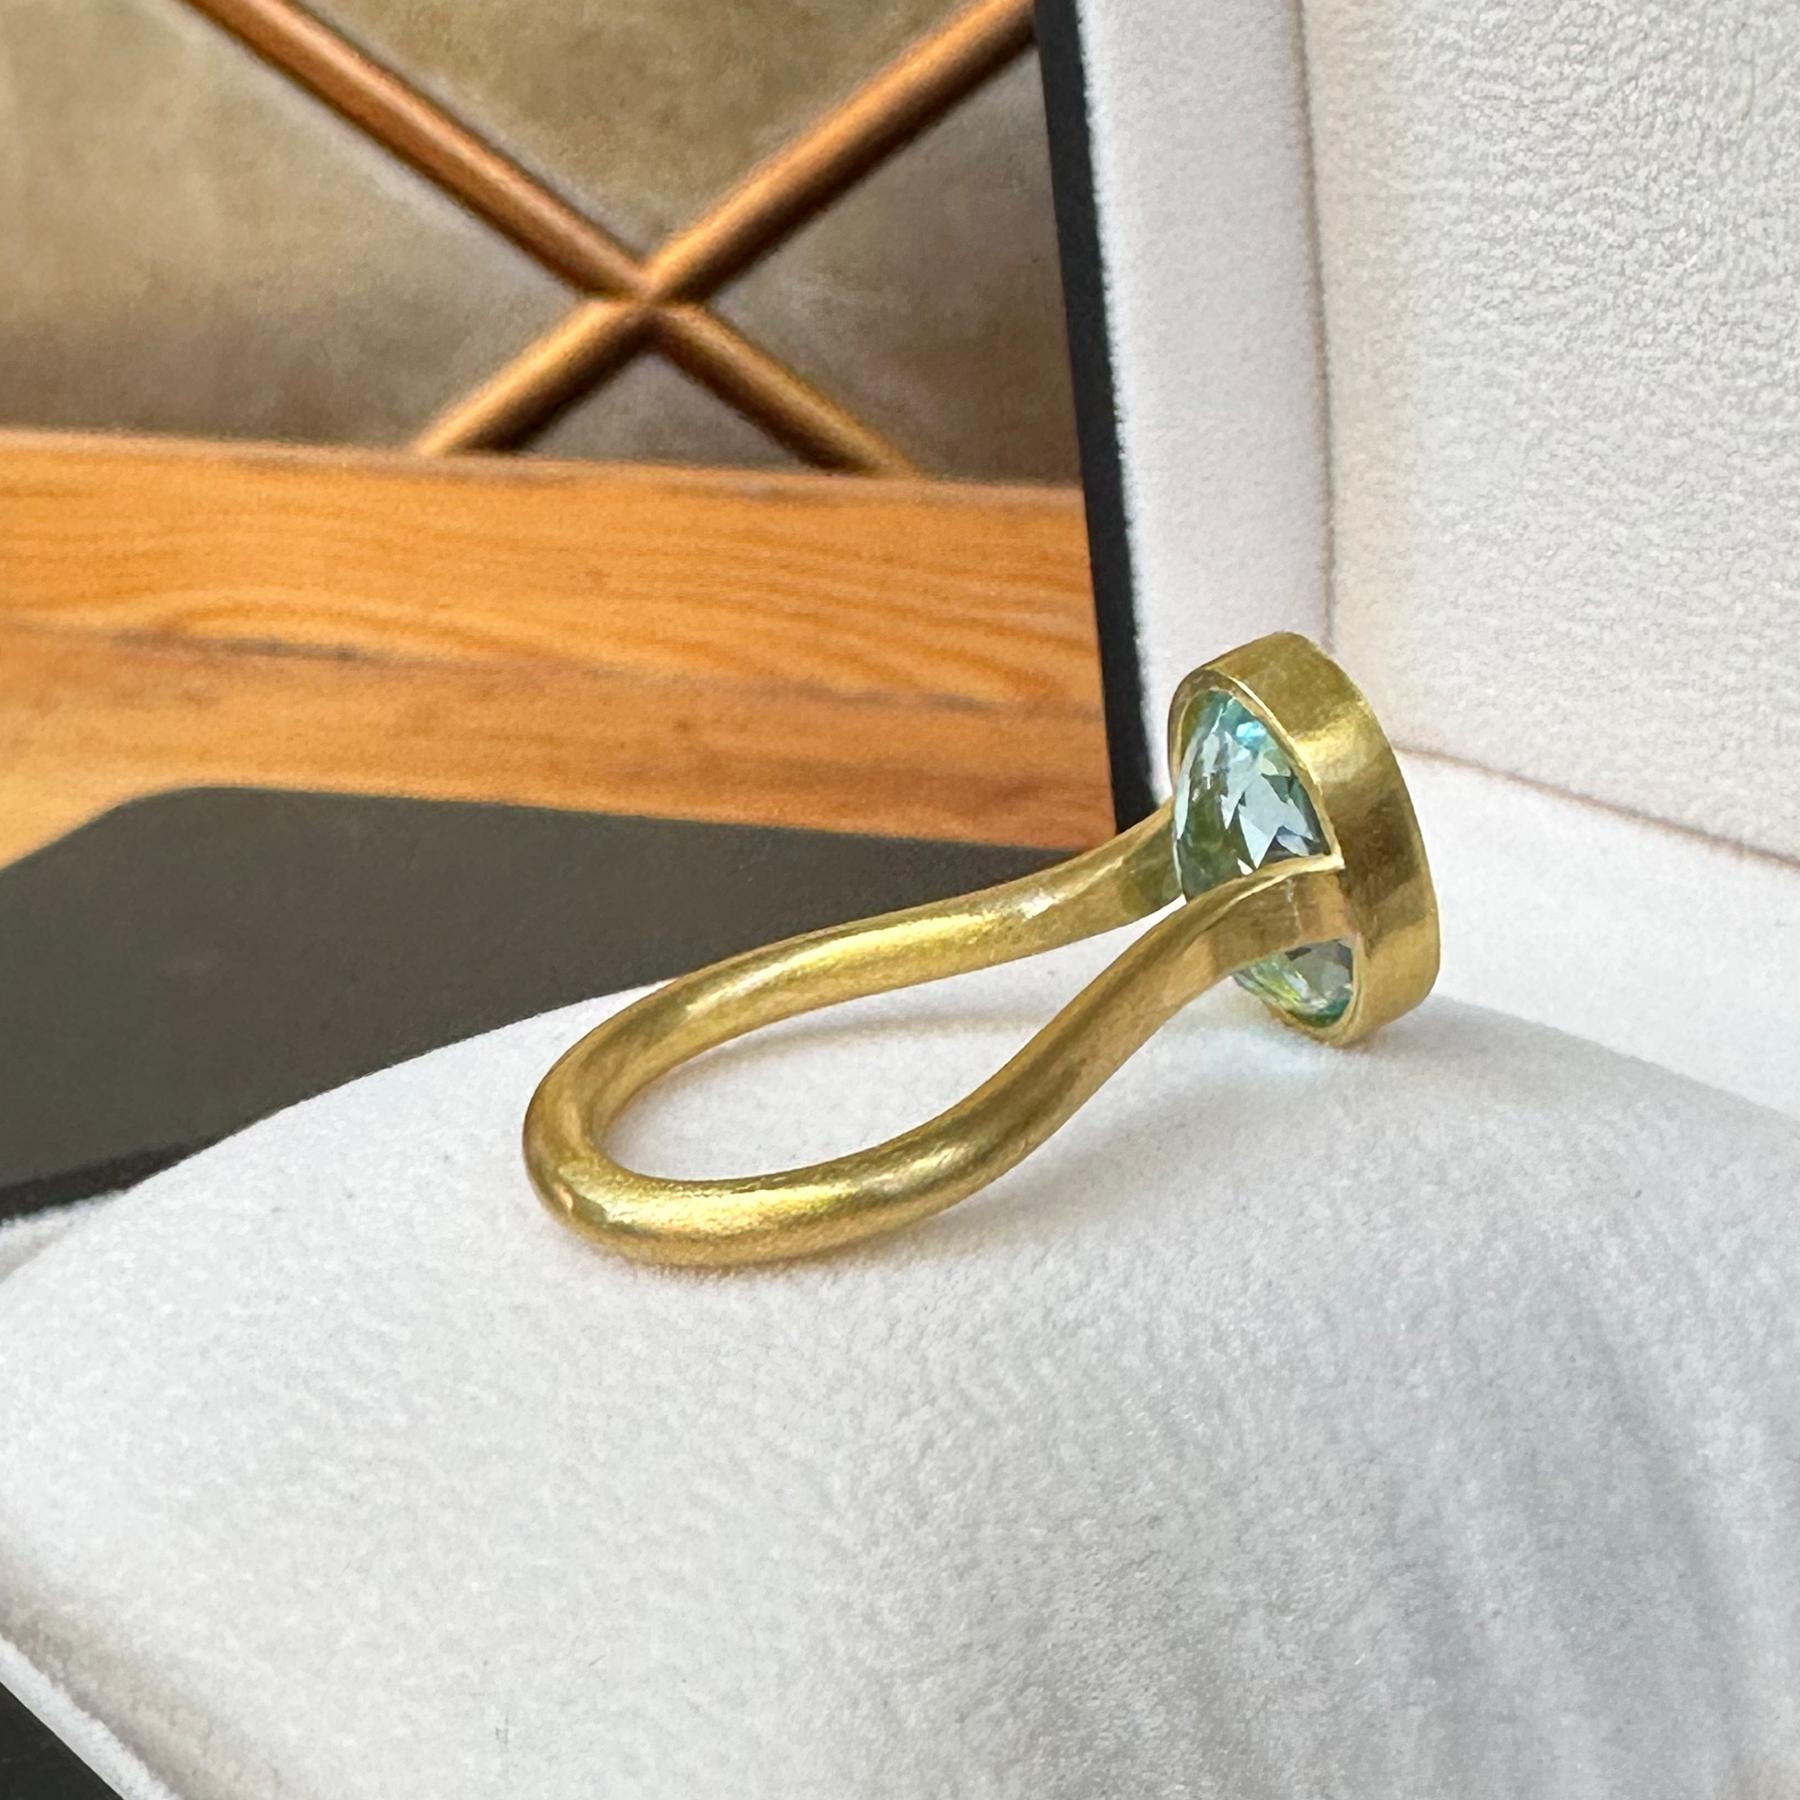 Women's PHILIPPE SPENCER 12.6 Ct. Aquamarine in 22K and 20K Gold Statement Ring For Sale